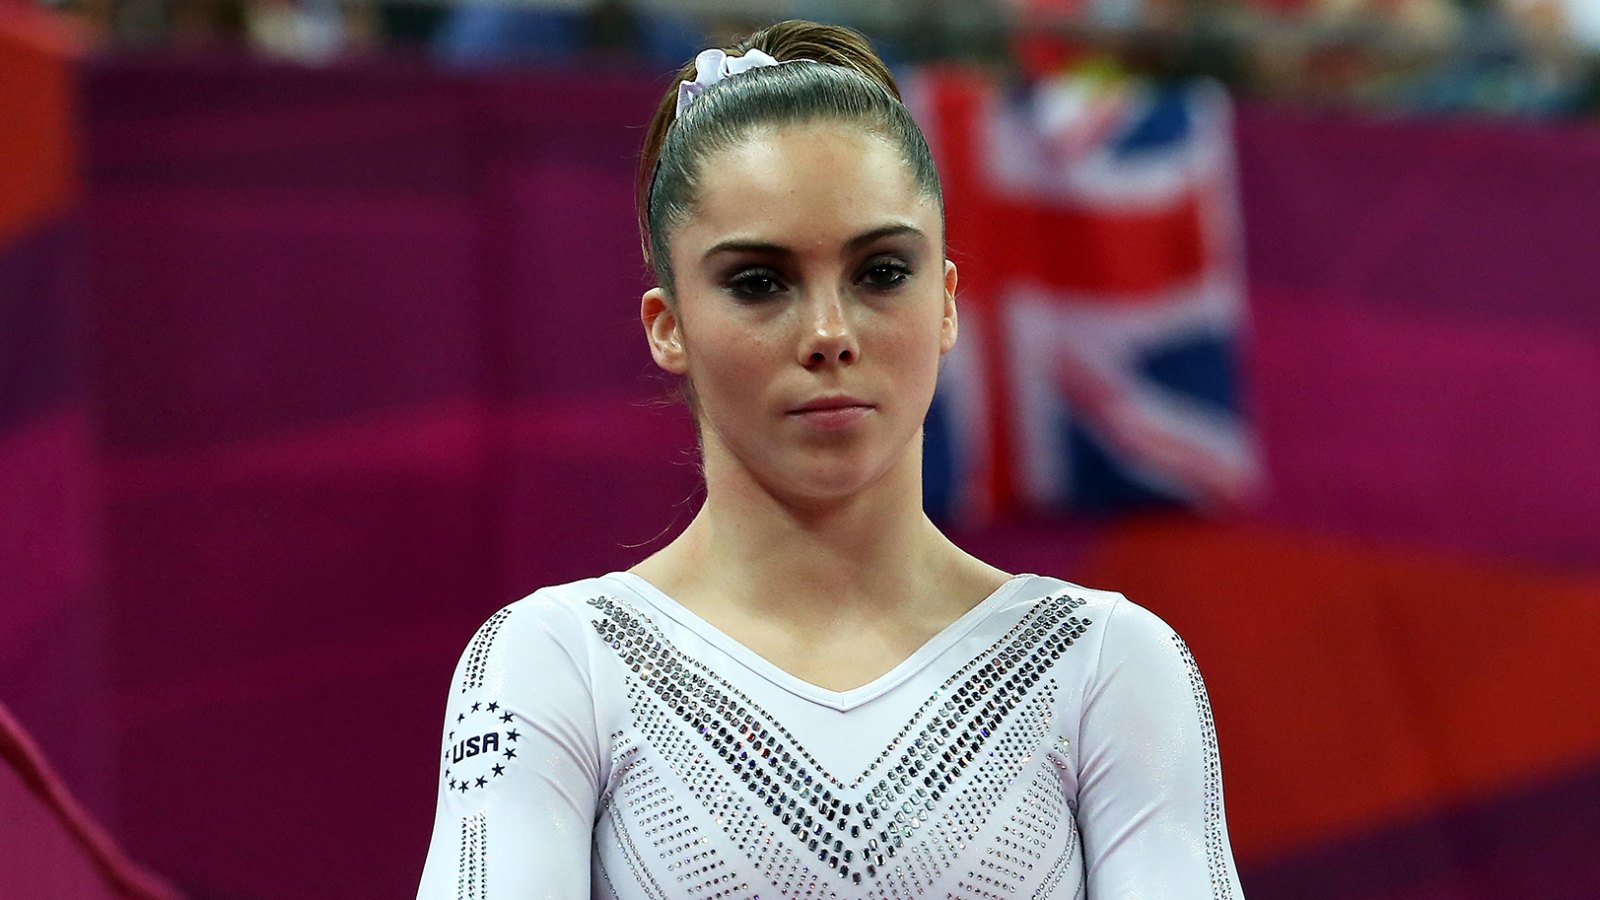 McKayla Maroney Mourns Her Father's Death: 'I'll Miss You Forever'